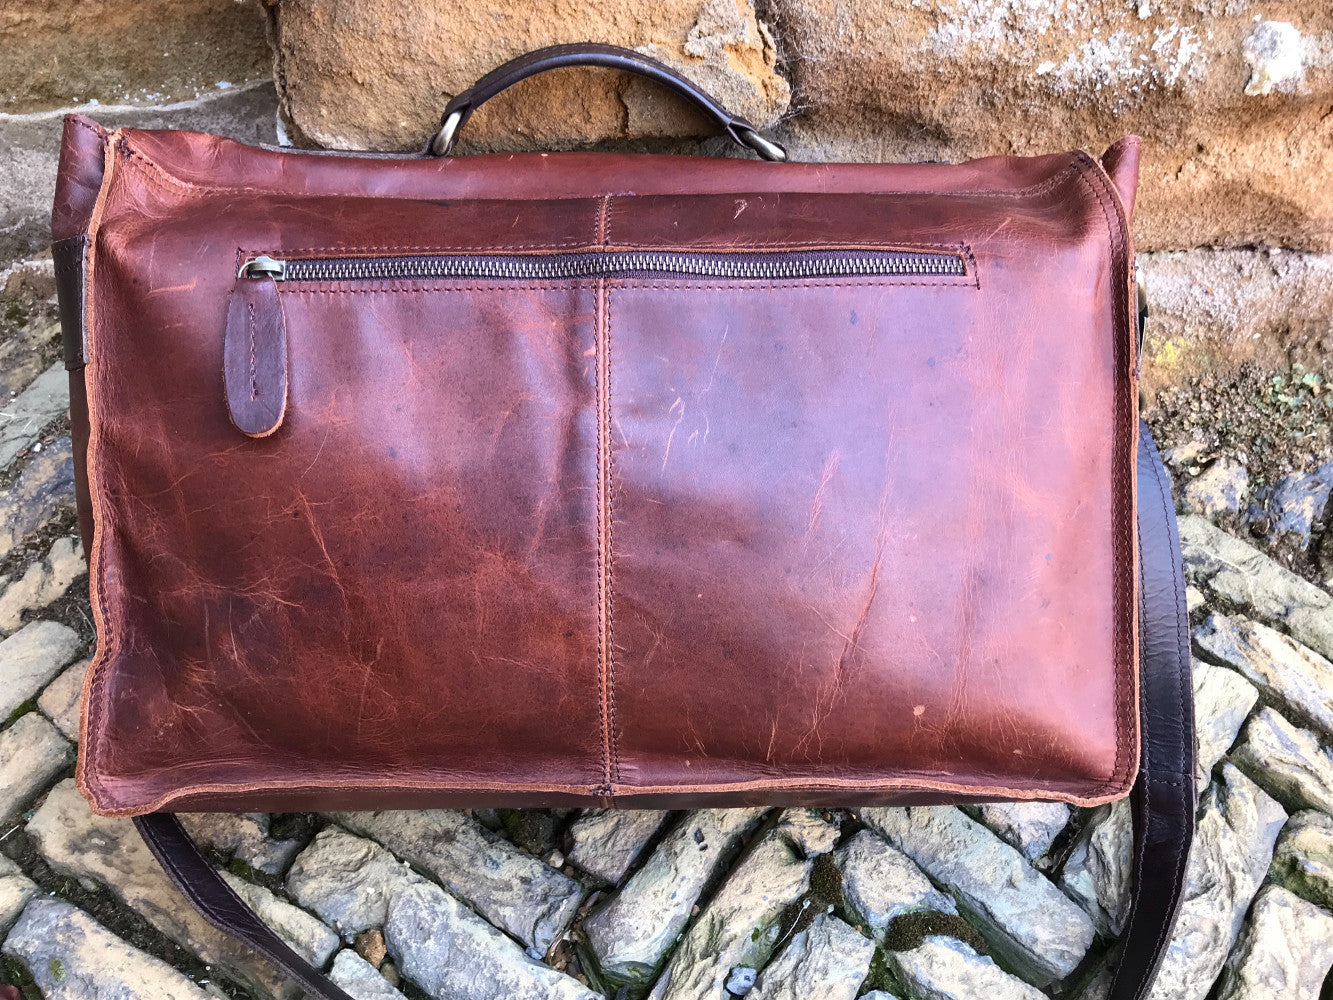 The Dorrington Briefcase. A classic 30's styled leather briefcase by Burghley Bags. A handmade leather vintage work bag, with enough space for 15" laptops. Comes with an adjustable and detachable shoulder strap. Striking dual brown back showing zip pocket.